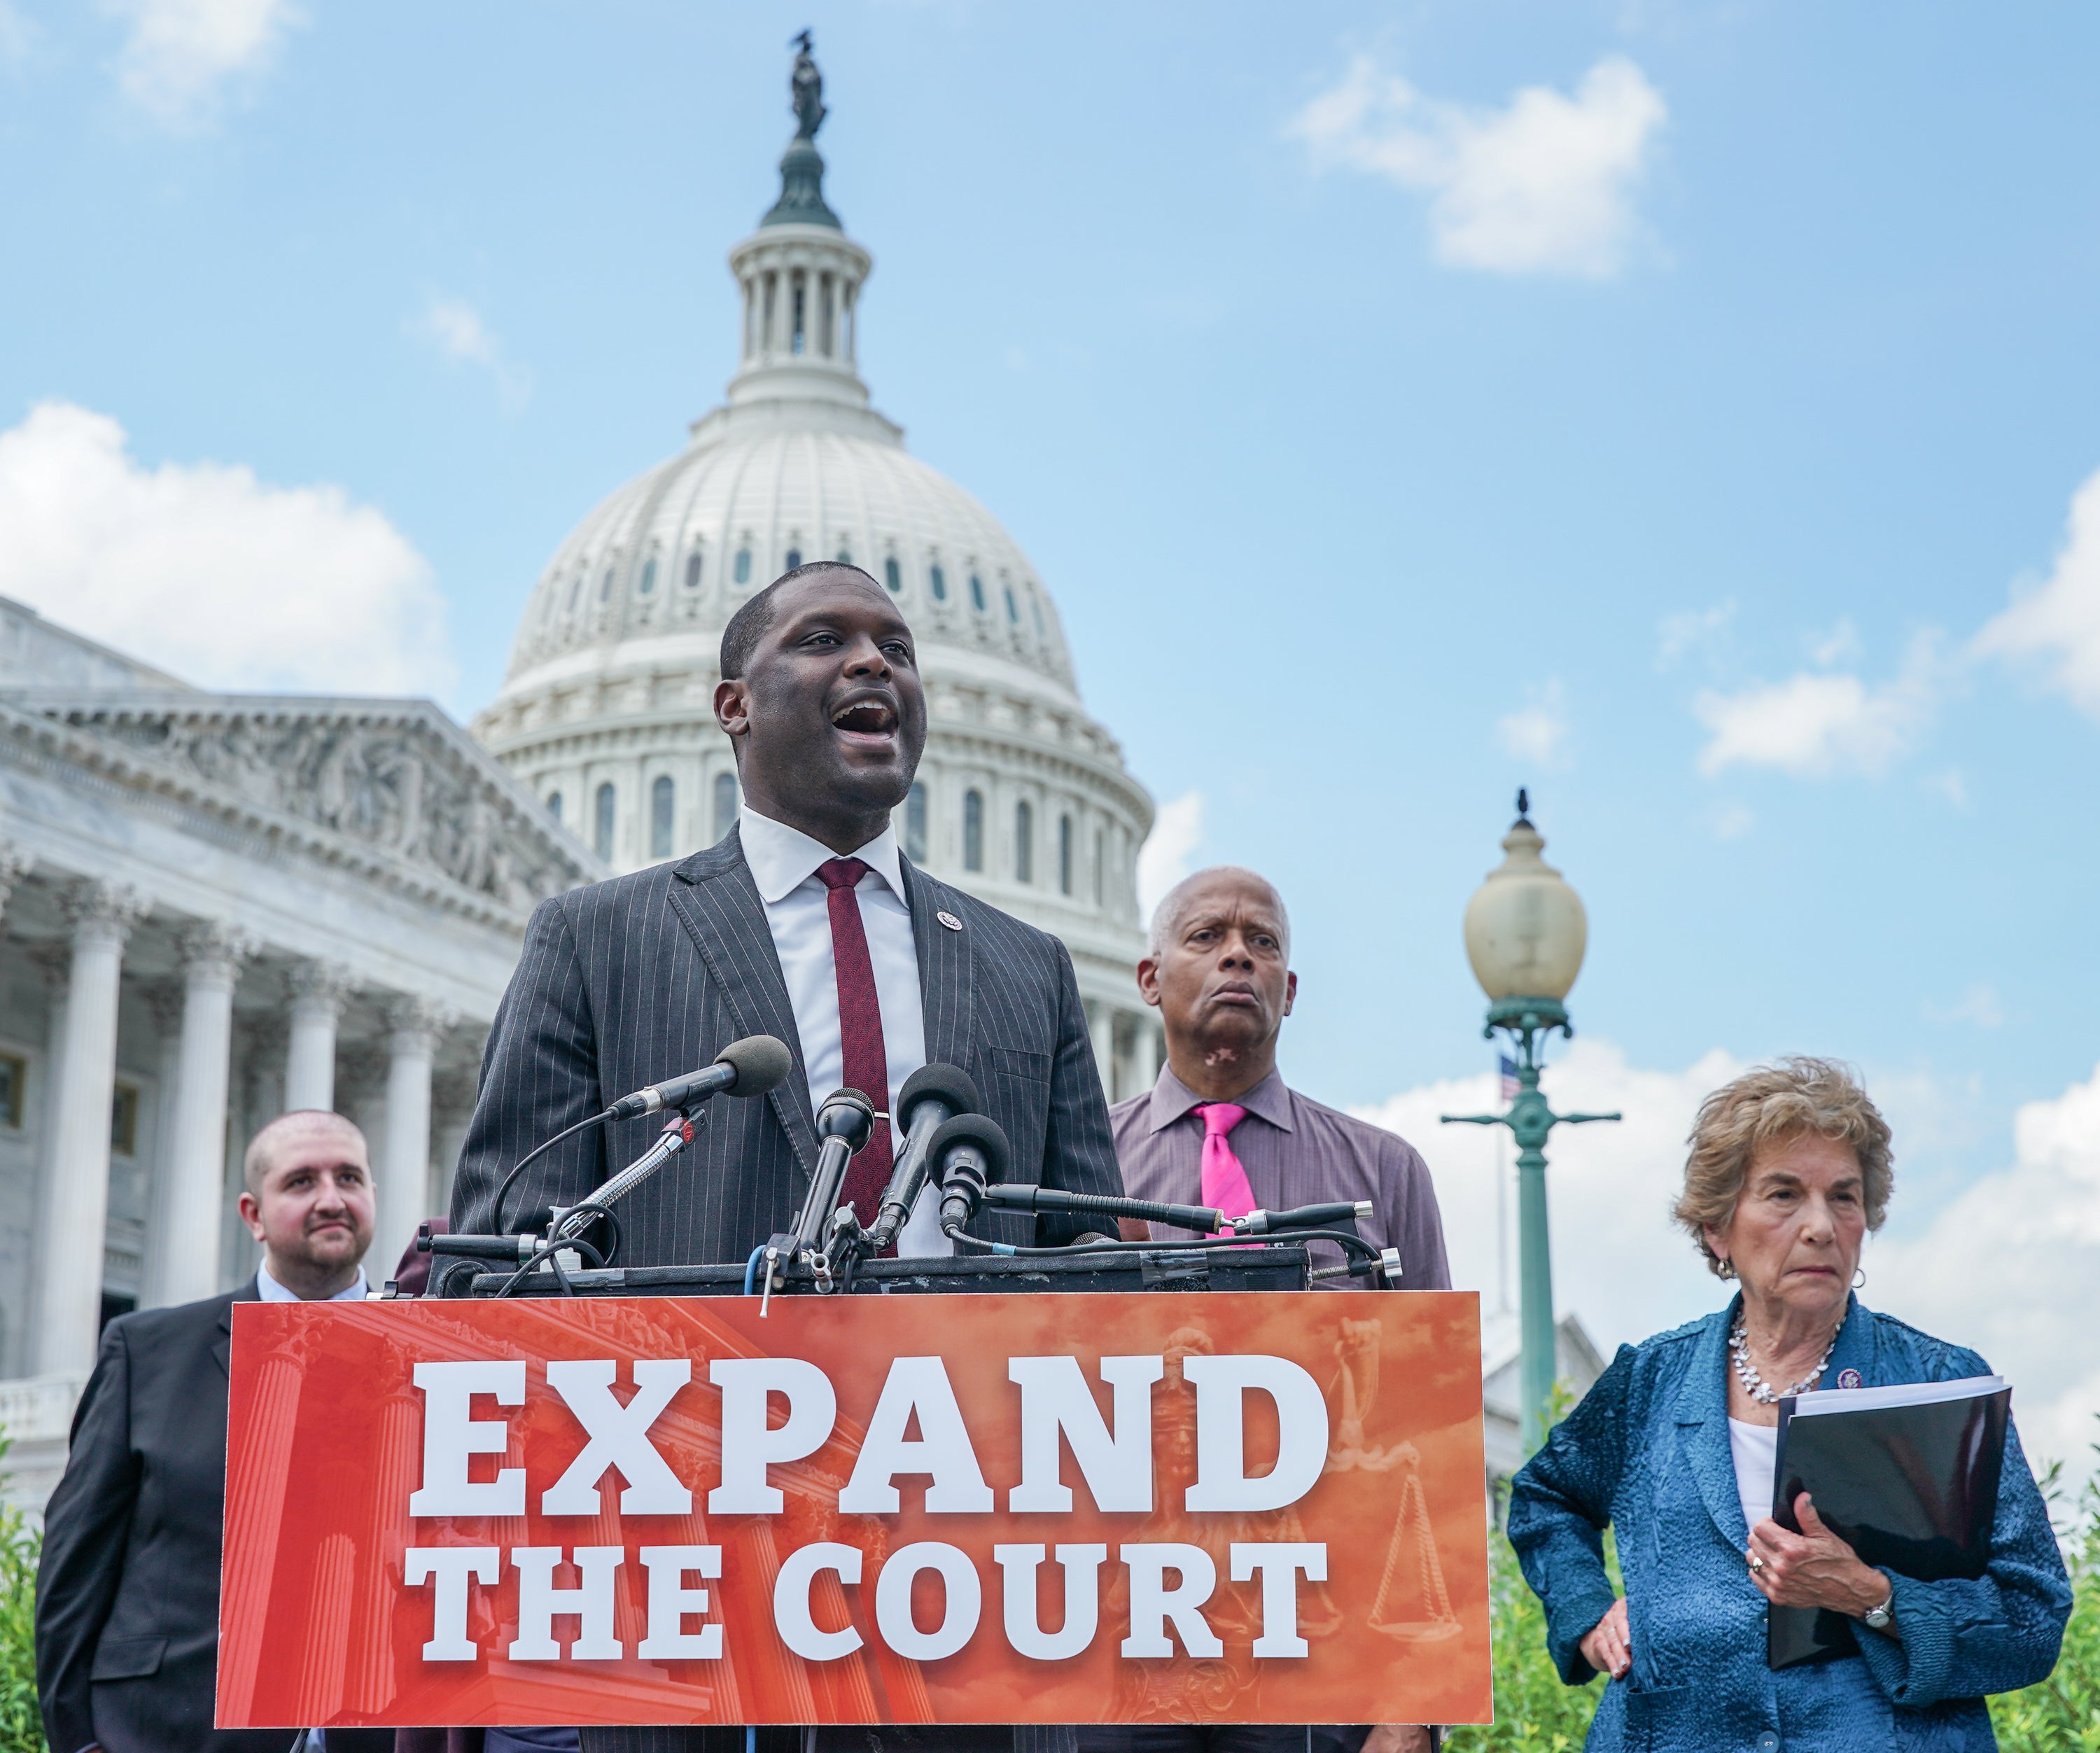 Rep. Mondaire Jones (D-NY) speaks at a press conference calling for the expansion of the Supreme Court on July 18, 2022 in Washington, DC